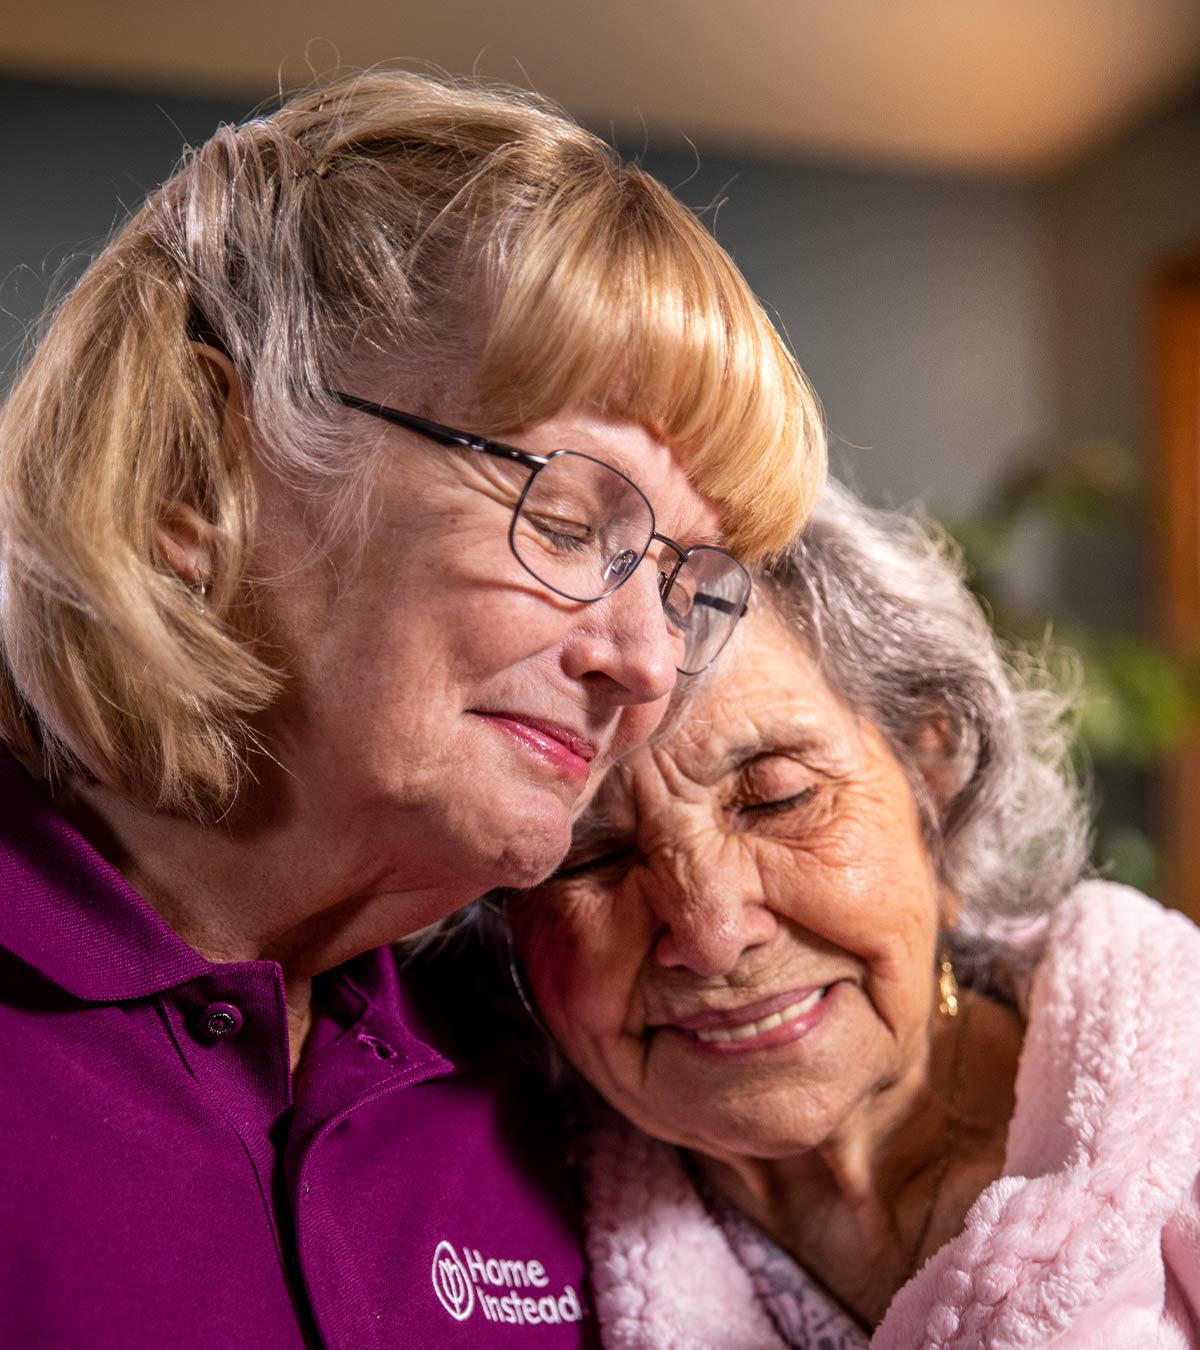 CAREGiver providing in-home senior care services. Home Instead of Melbourne, FL provides Elder Care to aging adults. 